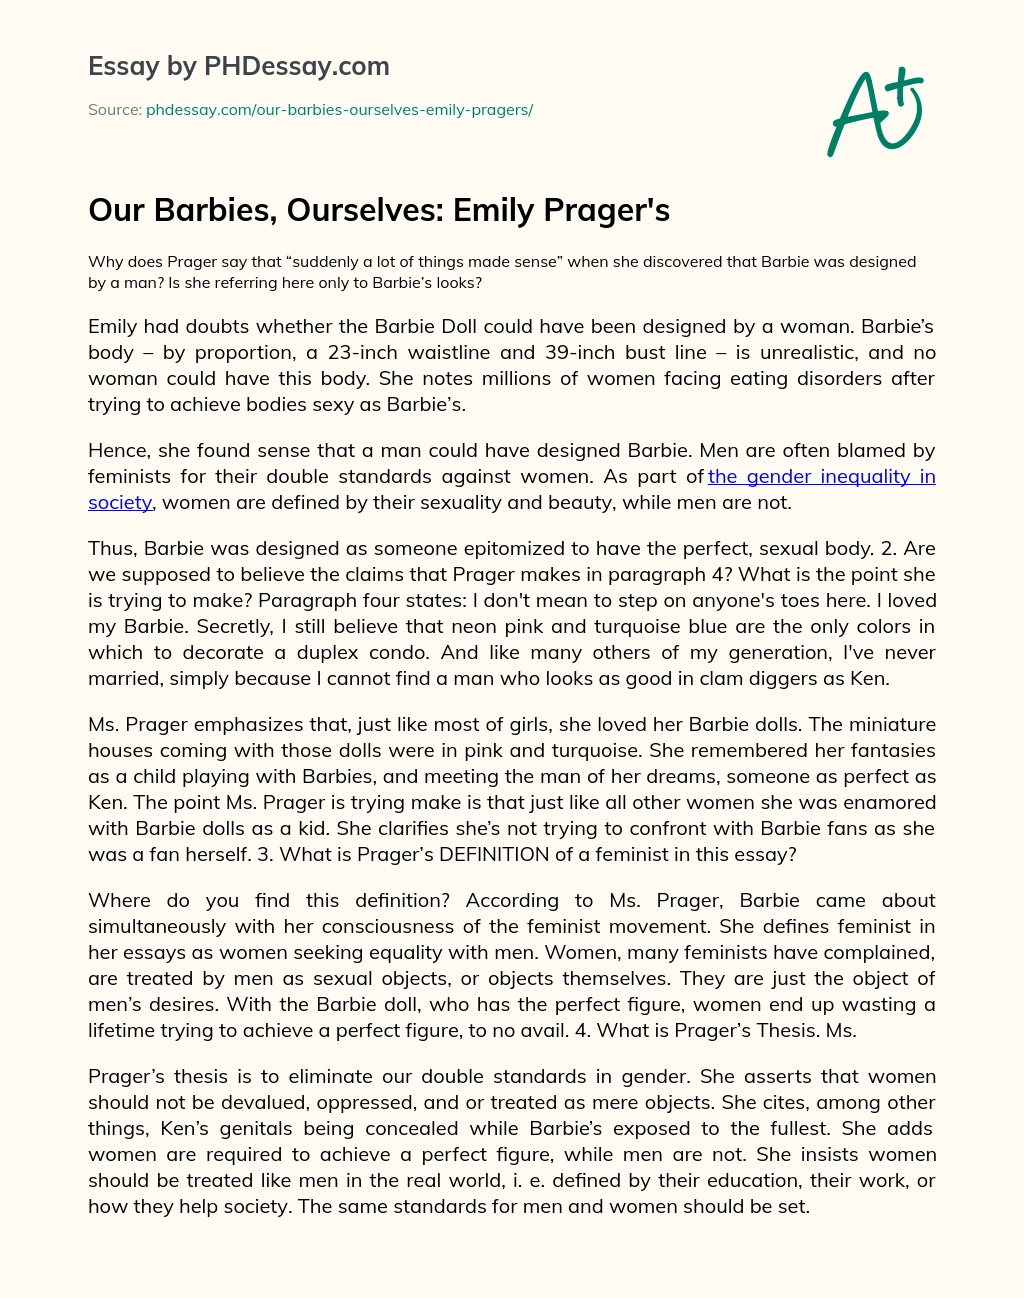 Our Barbies Ourselves Emily Pragers 500 Words